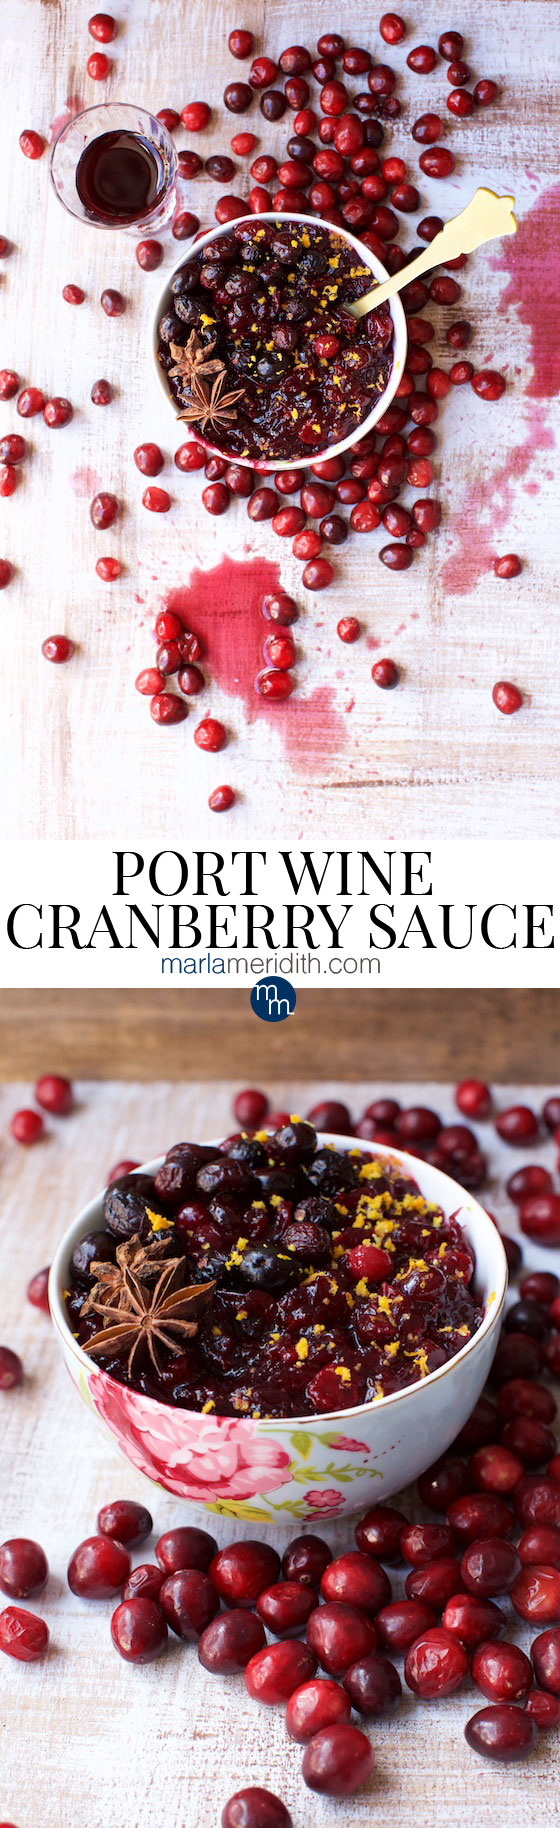 Port Wine Cranberry Sauce recipe. Bookmark for holiday feasts! Marlameridith.com #recipe #vegan #glutenfree #Christmas #Thanksgiving #holiday